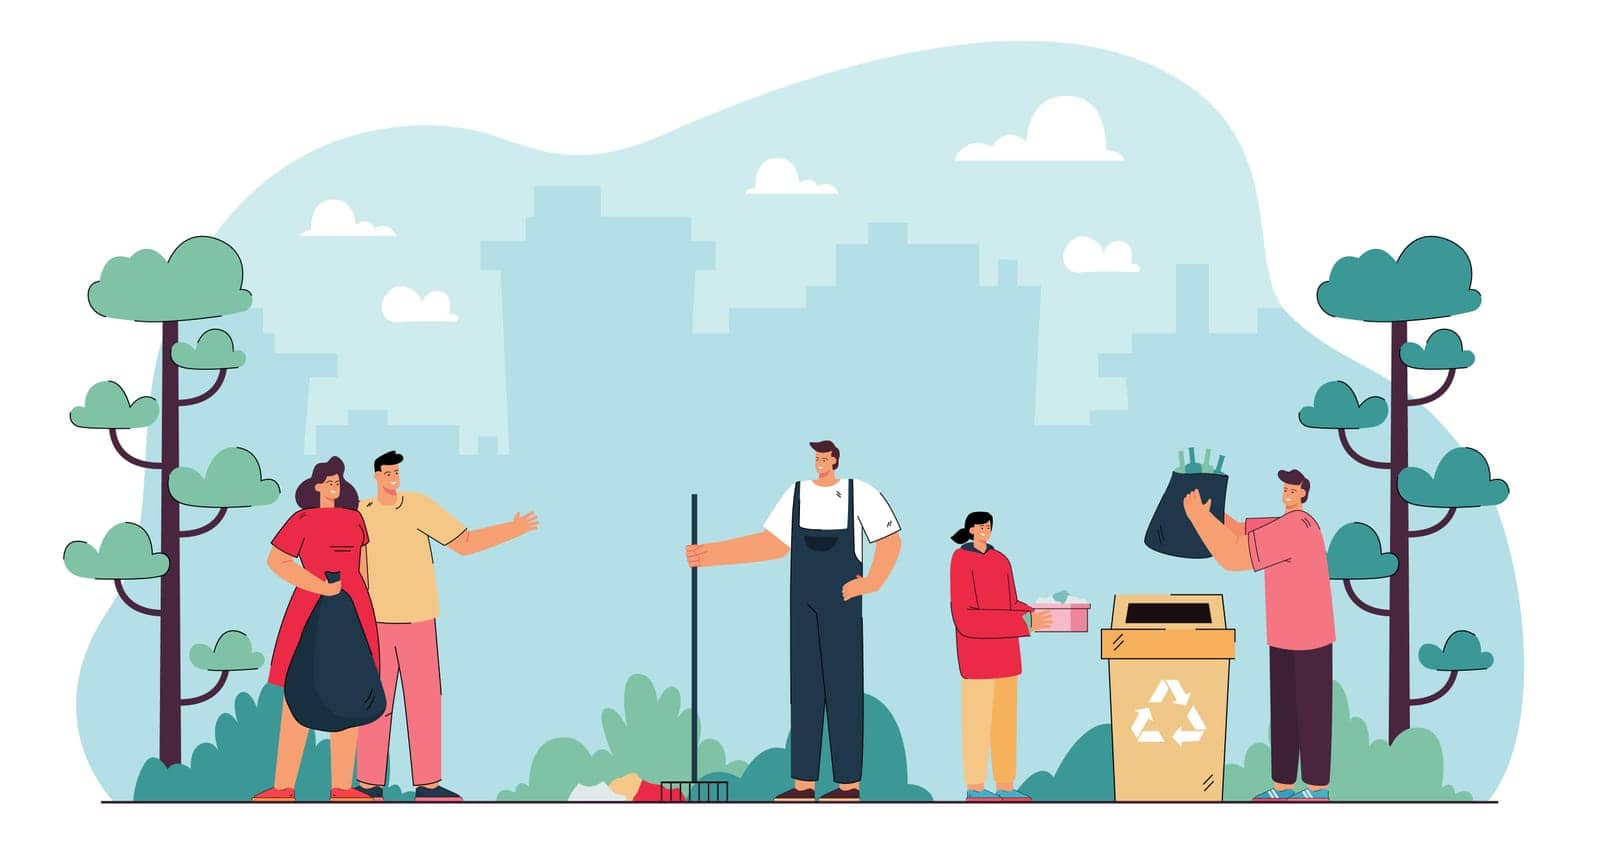 Volunteers cleaning up garbage in city park. Happy people working together, collecting trash flat vector illustration. Ecology, nature, community, teamwork concept